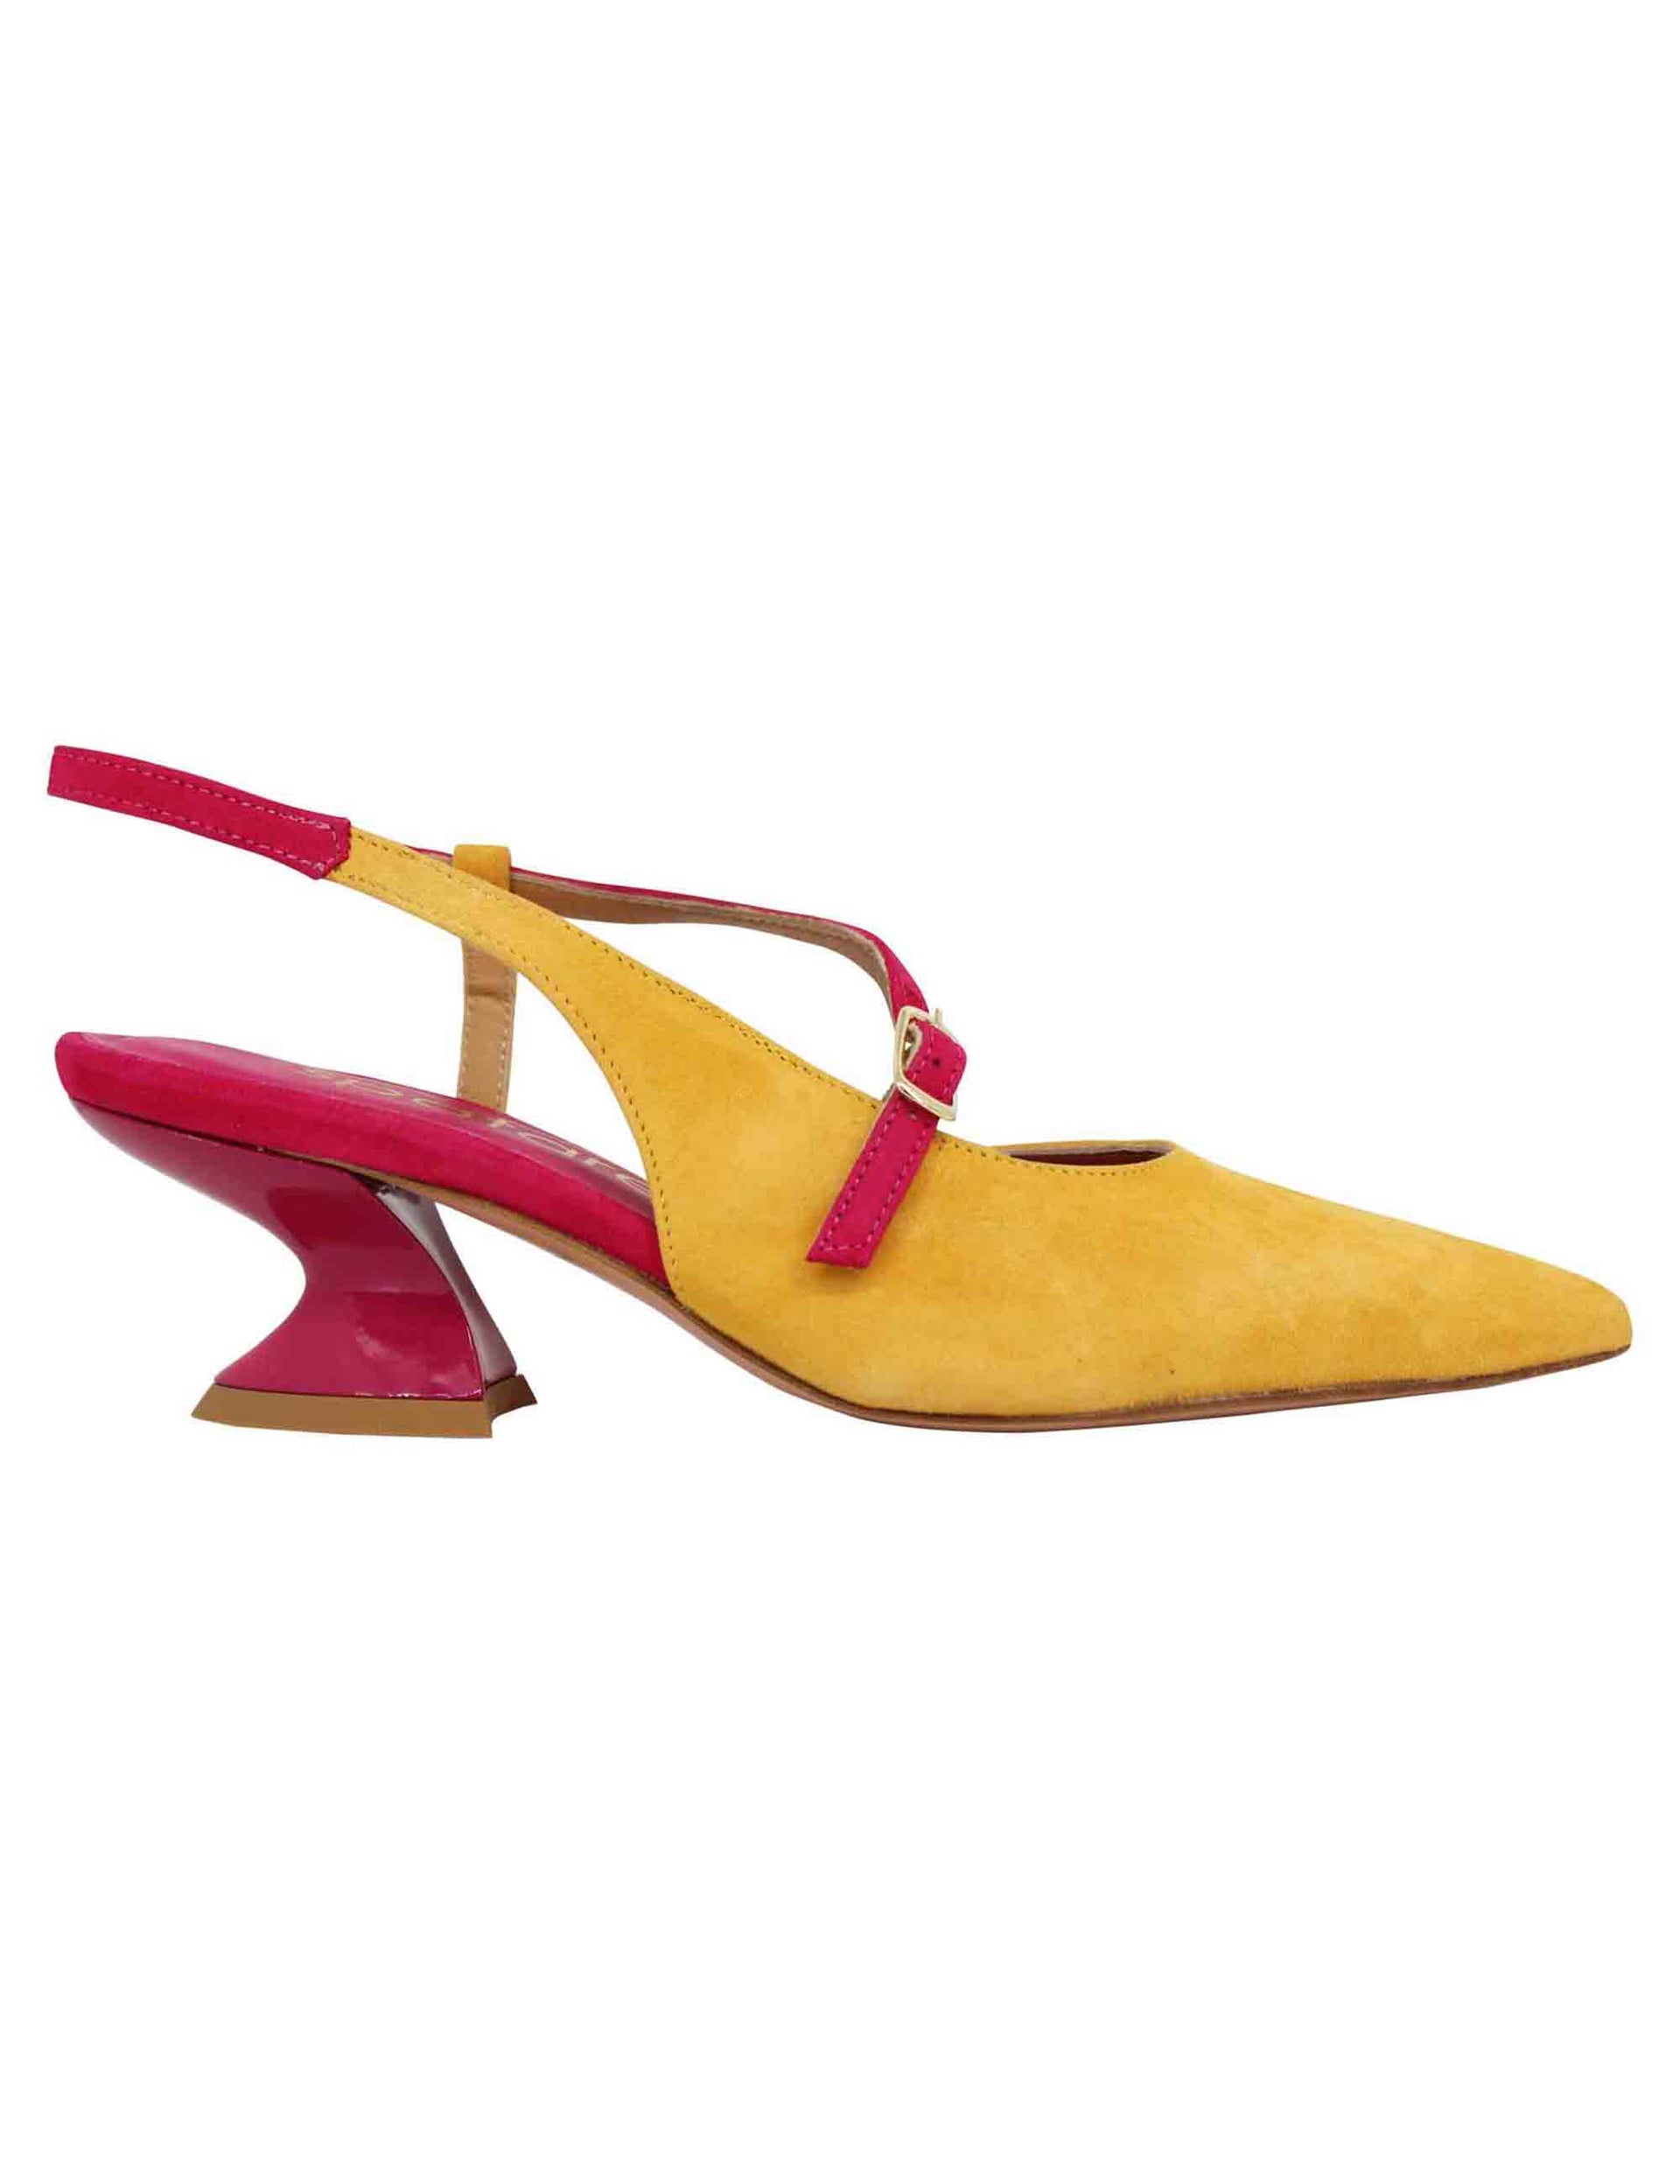 Women's slingback pumps in yellow suede with contrasting heel